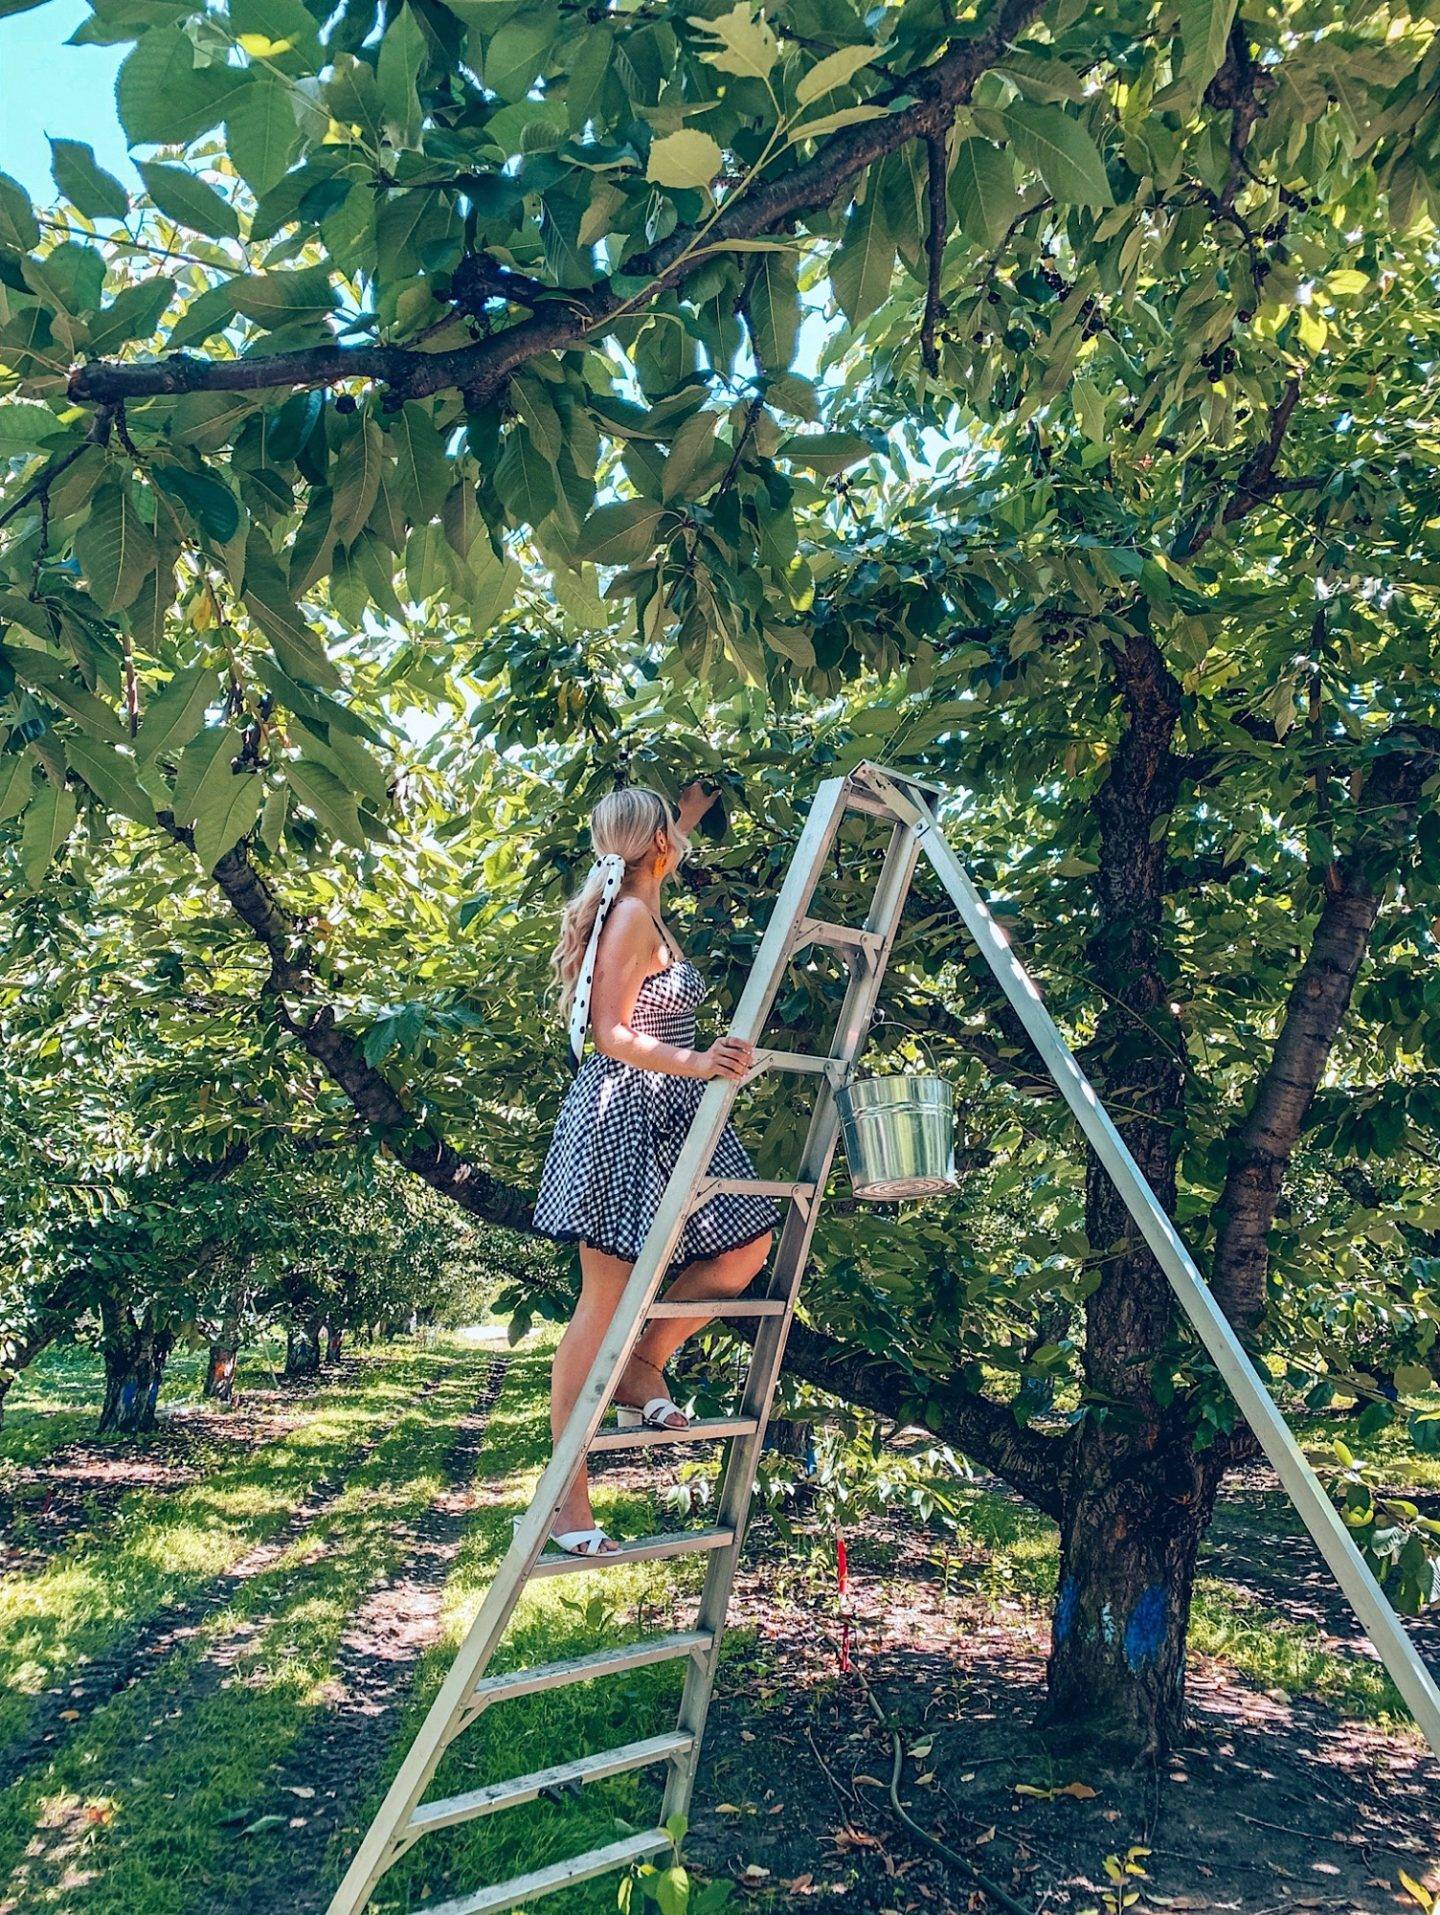 Picking cherries is a fun activity to do in Kelowna